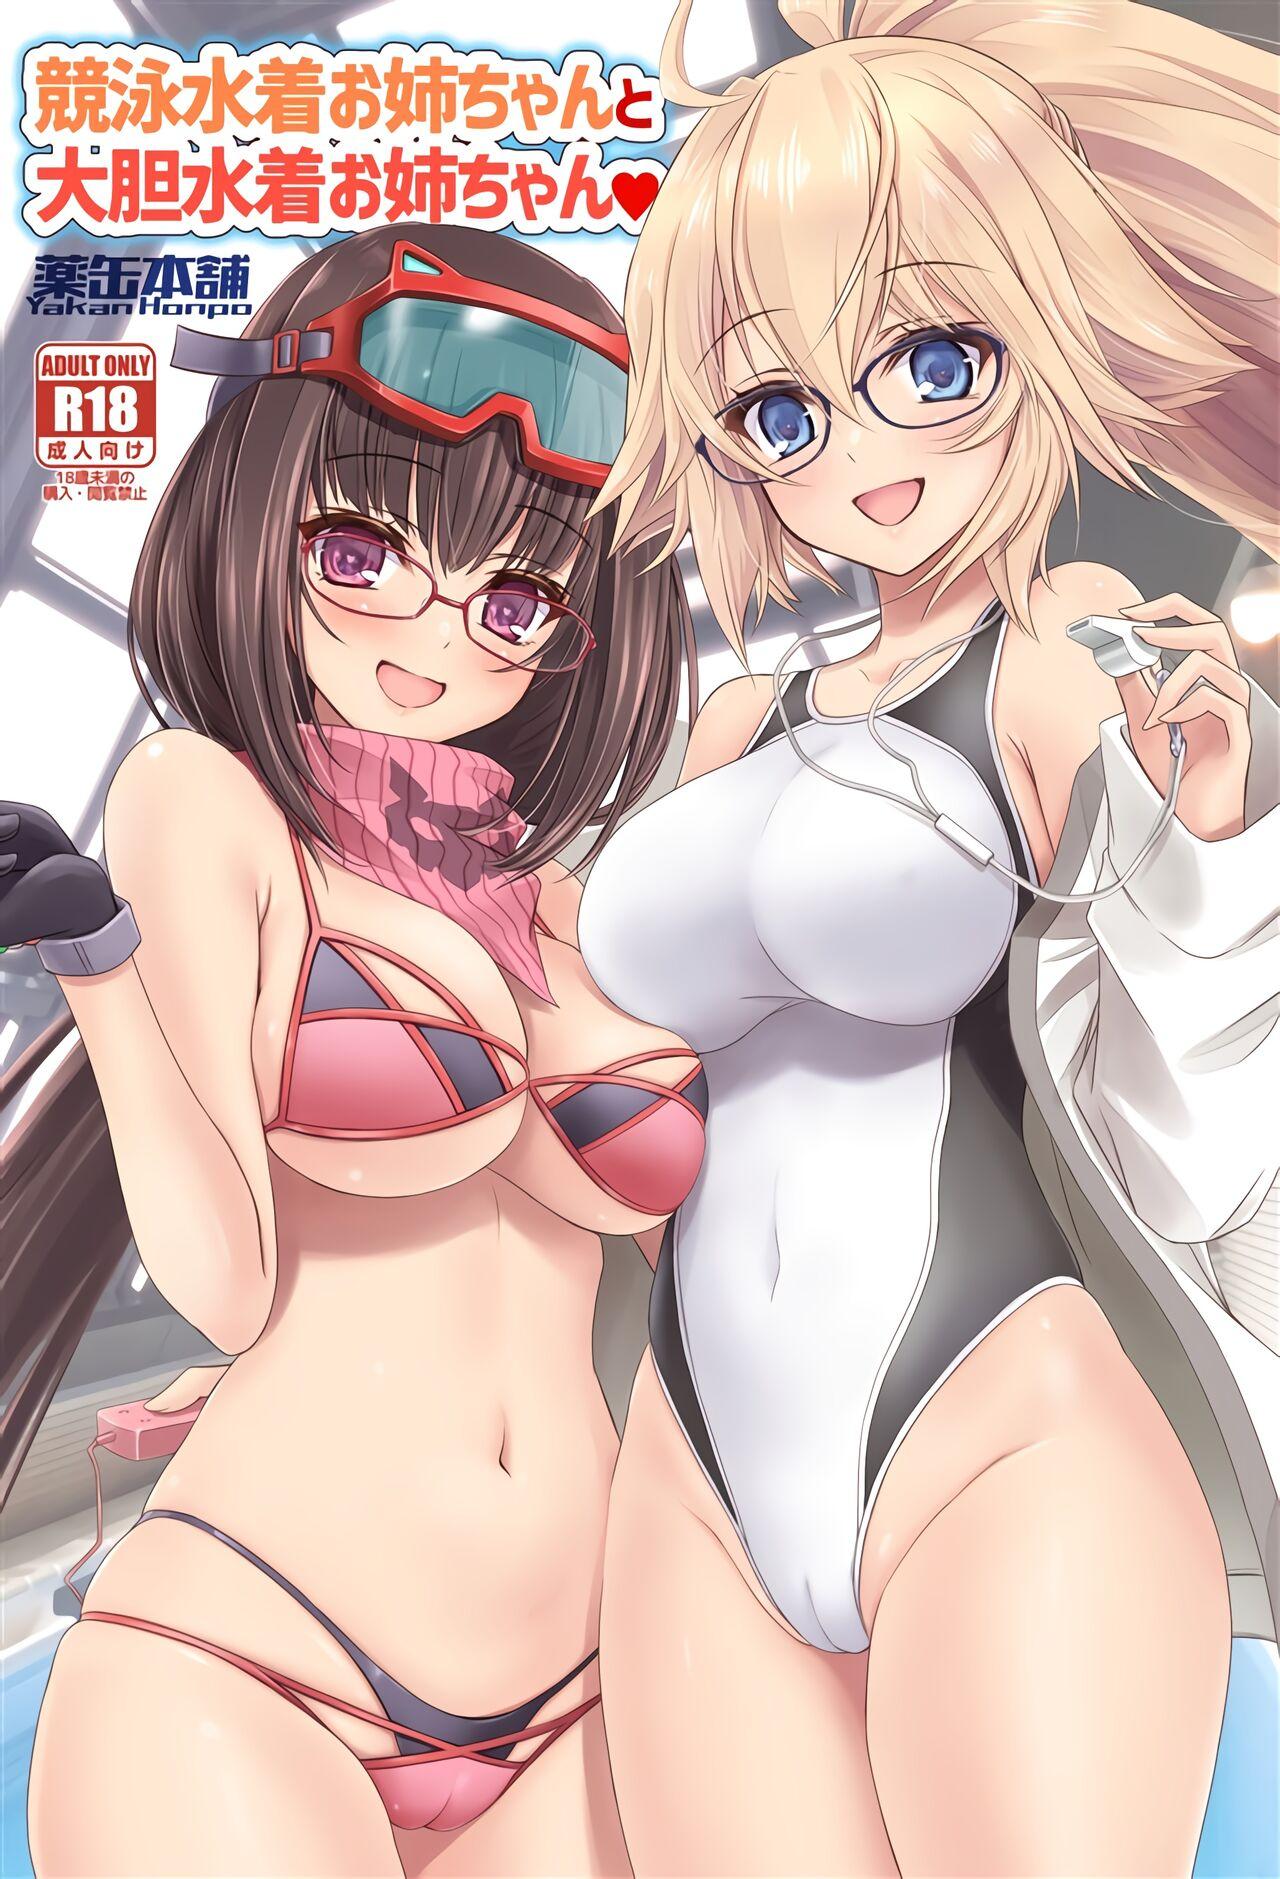 This (CT41) [Yakan Honpo (Inoue Tommy)] Kyouei Mizugi Onee-chan to Daitan Mizugi Onee-chan (Fate/Grand Order) [Chinese] [不咕鸟汉化组] - Fate grand order 18 Year Old Porn - Picture 1